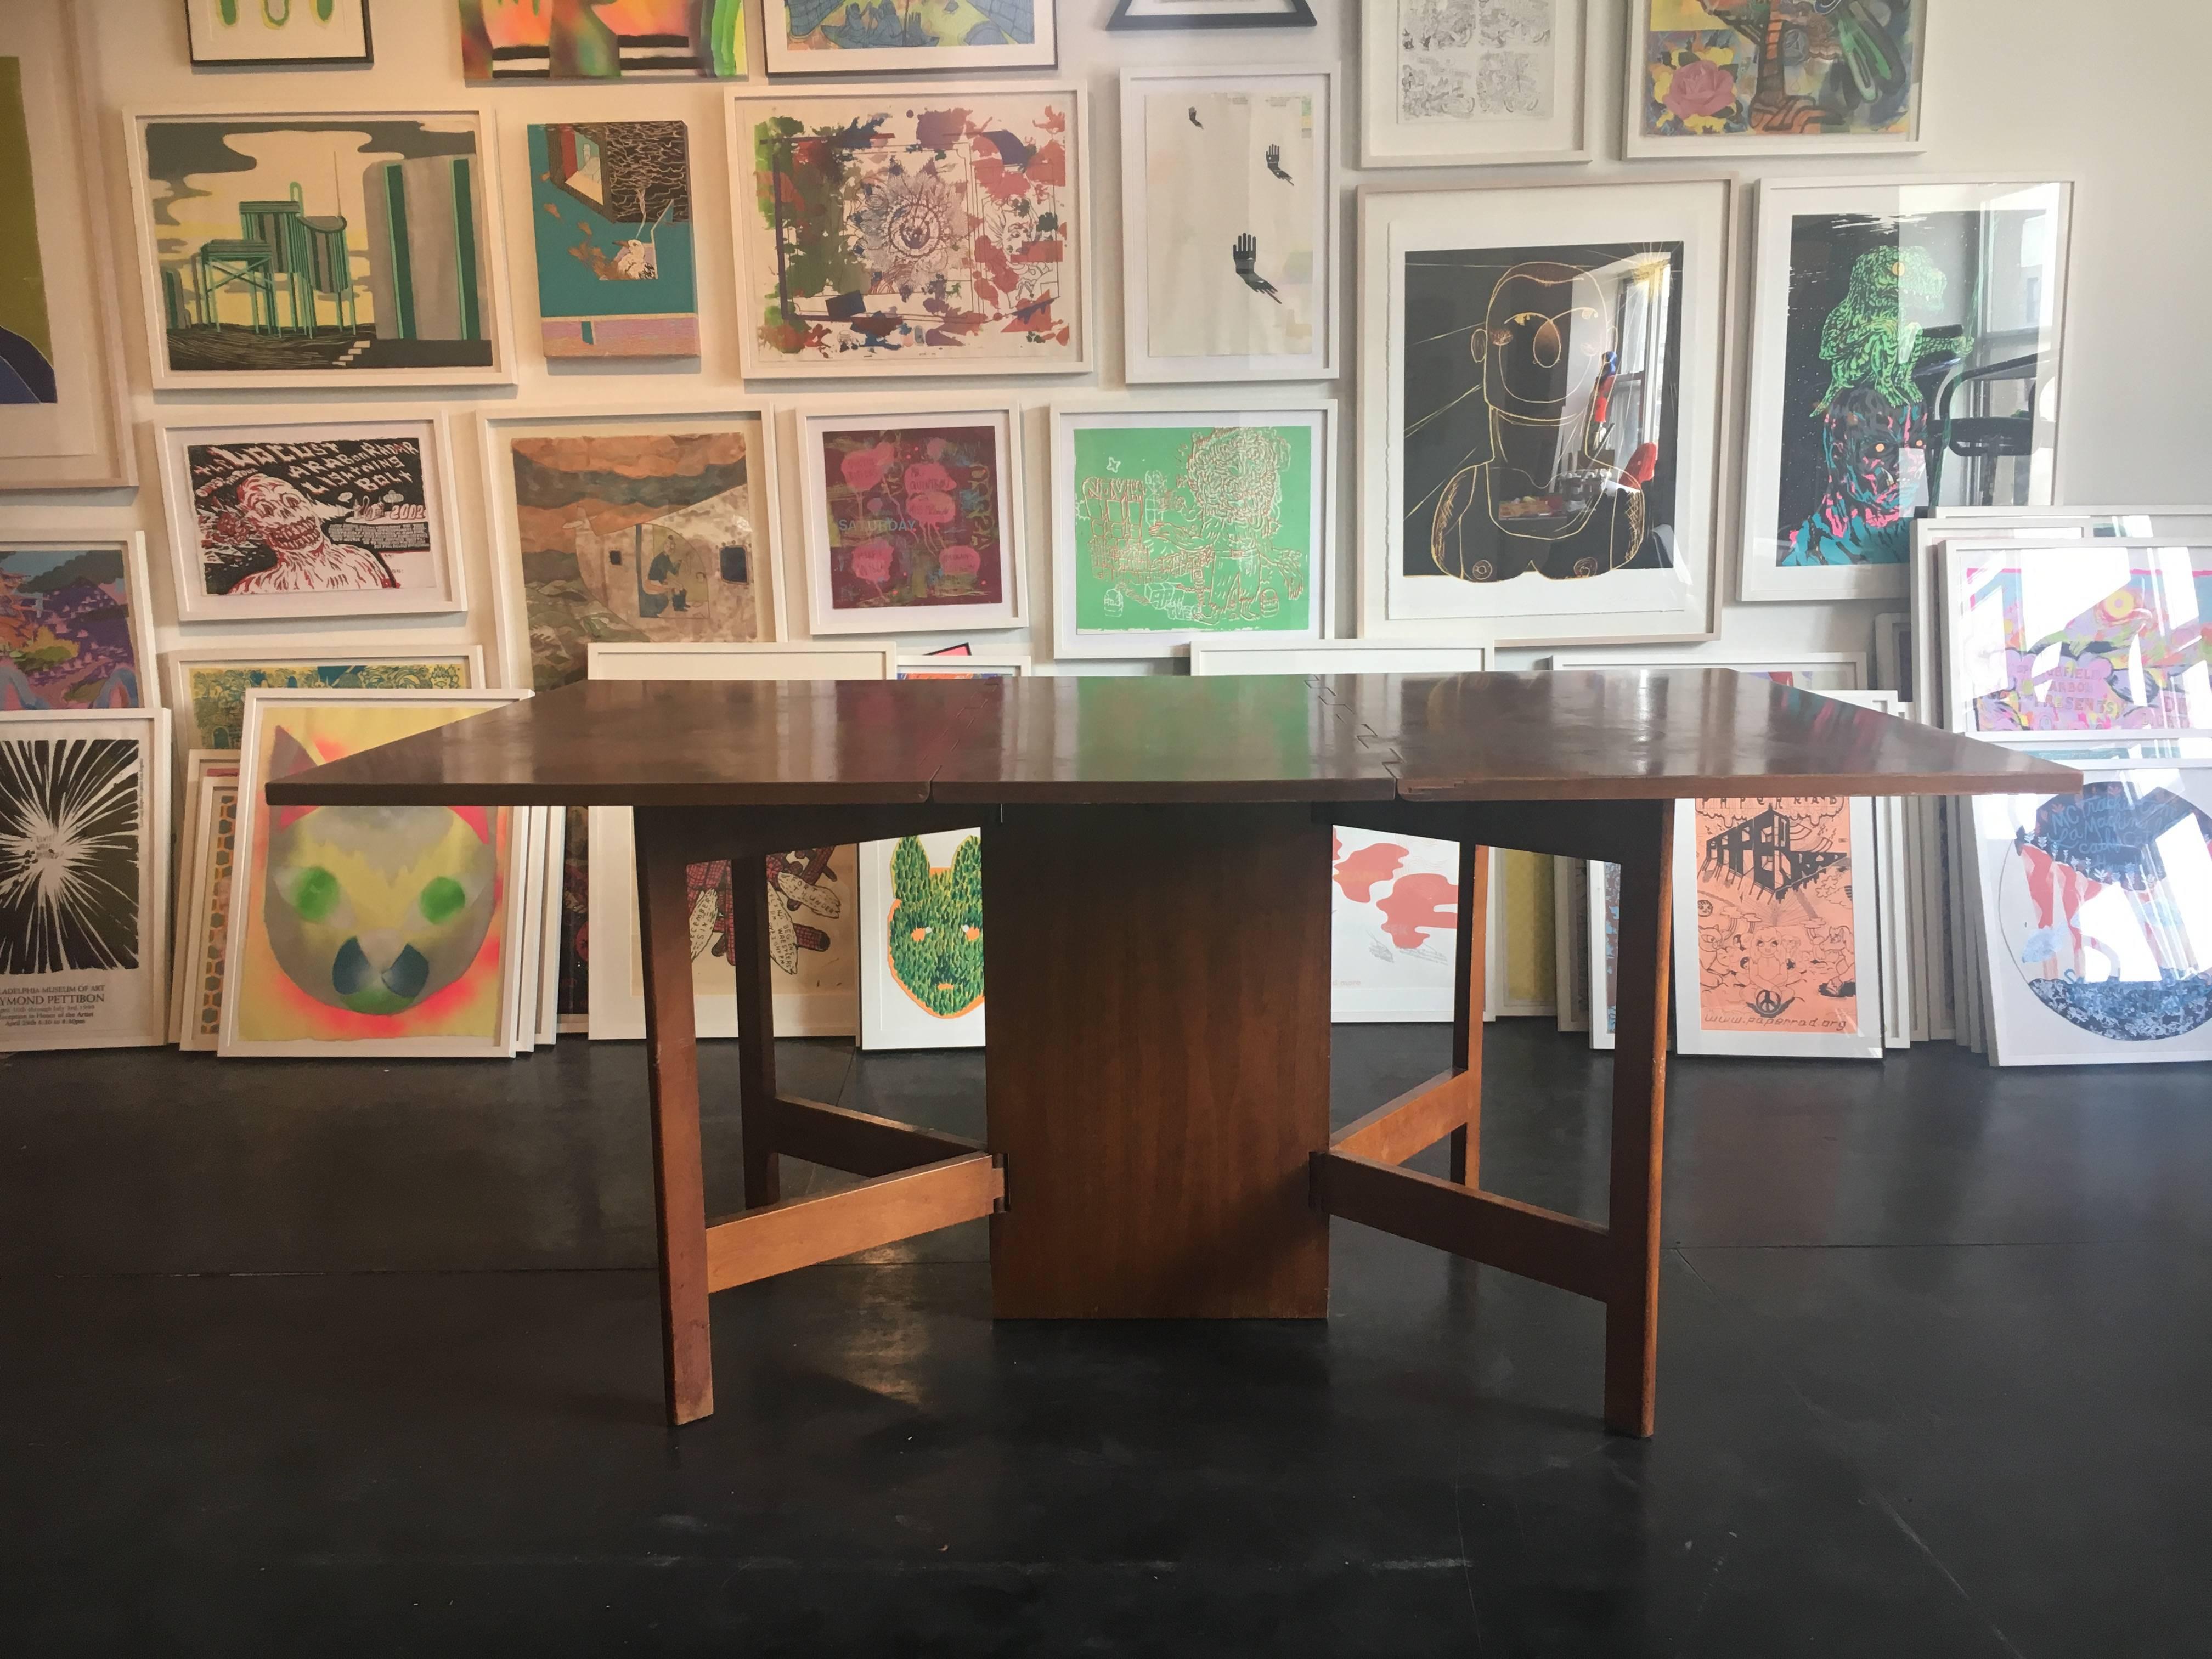 Gate-leg dining table designed by George Nelson for Herman Miller. Model 4656.
Featuring wooden hinged top and base. Works well in small spaces, and can be adjusted to seat two to six people or used as a desk or console table. Measures 18